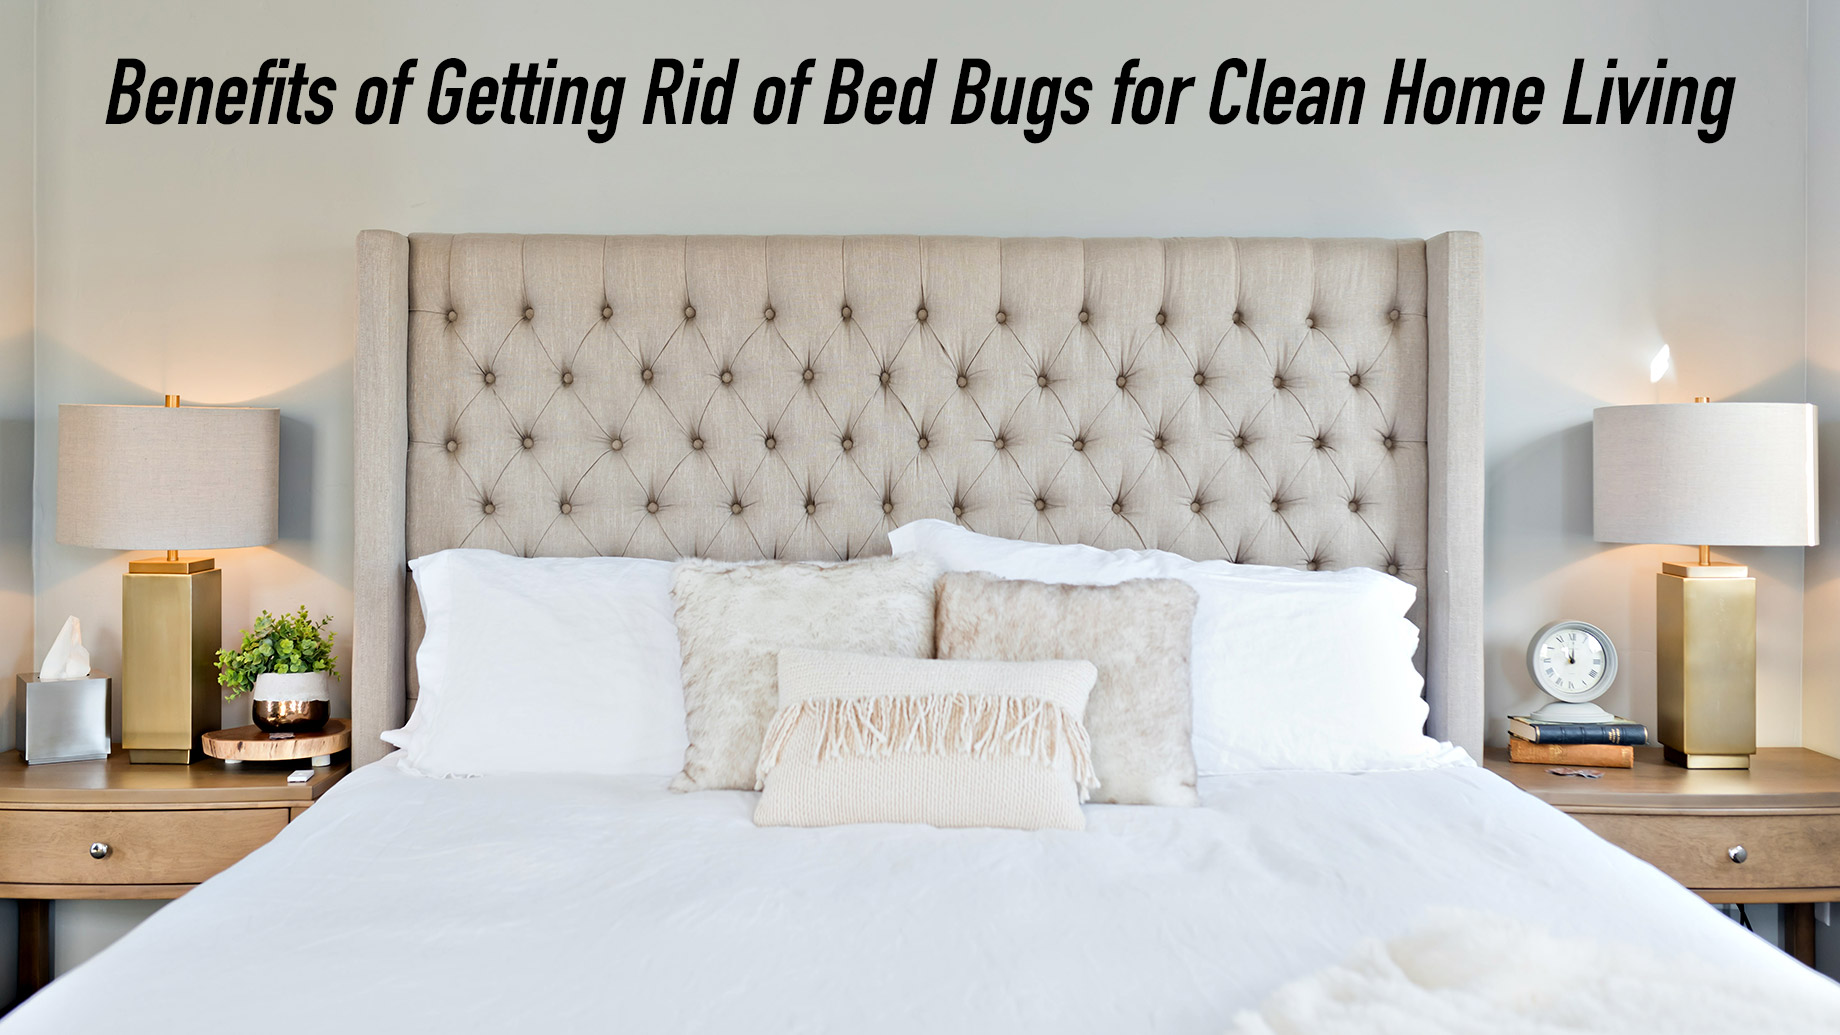 Benefits of Getting Rid of Bed Bugs for Clean Home Living